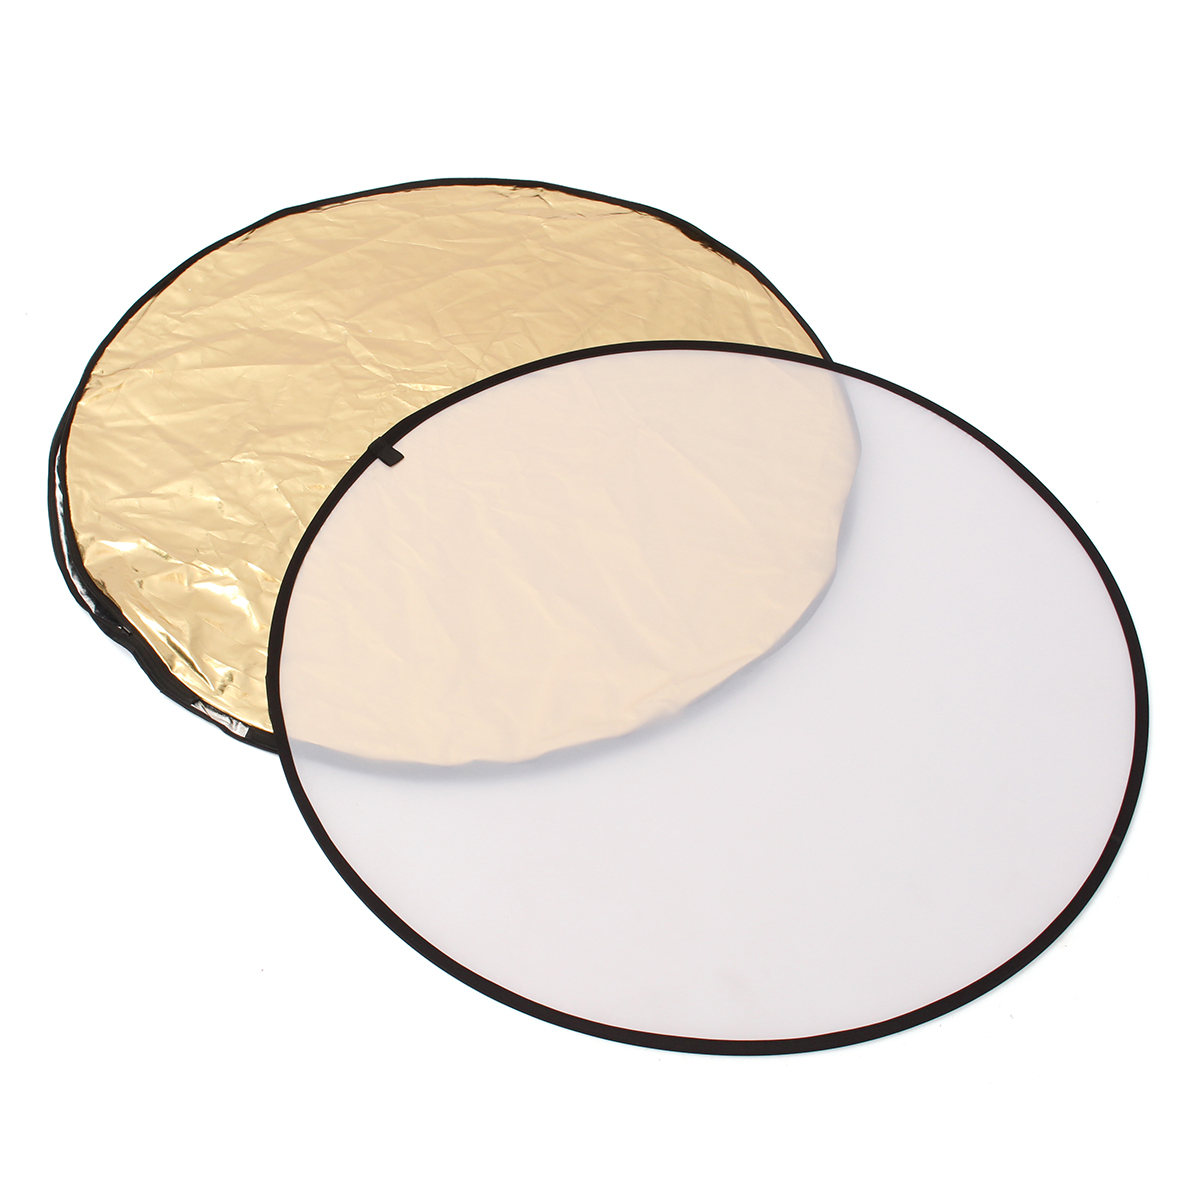 Mohoo-110cm-Round-Shape-5-in1-Studio-Photo-Multi-Disc-Collapsible-Light-Reflector-Photography-1974942-7